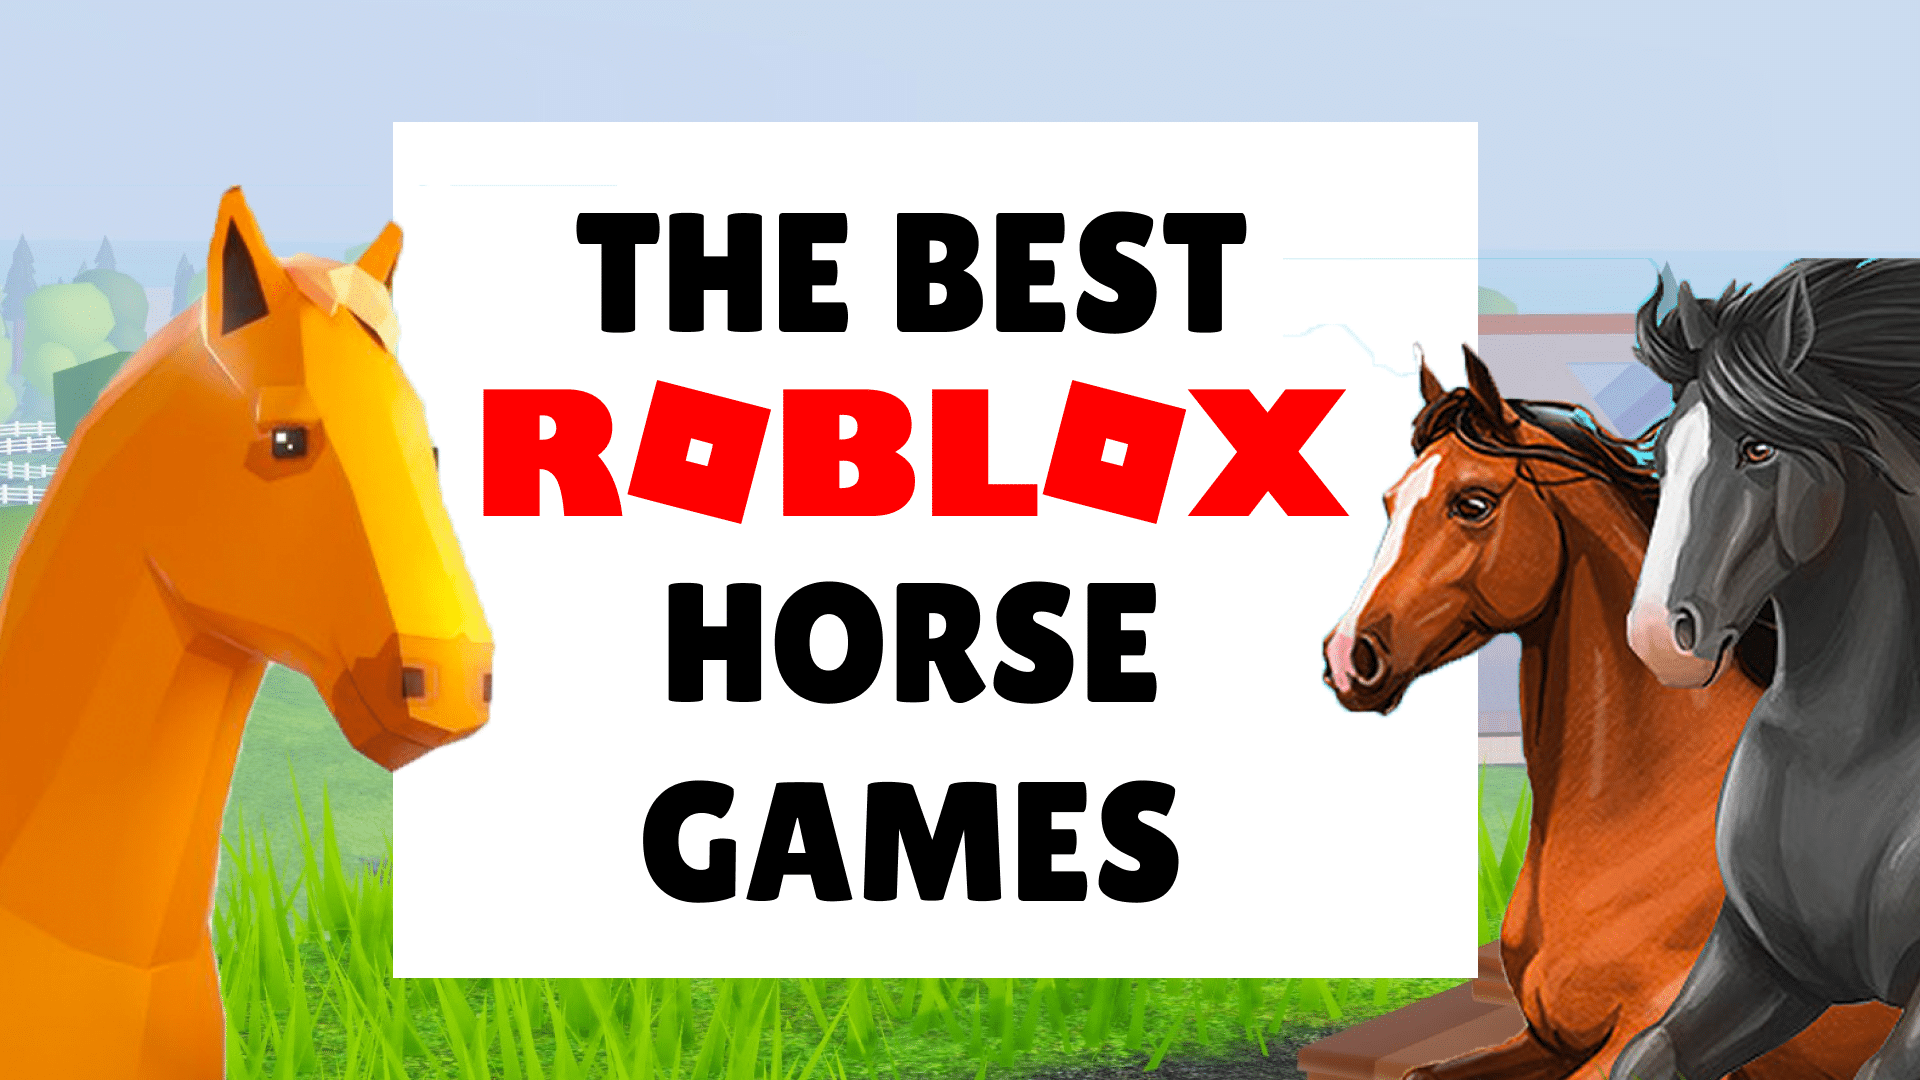 The Best Roblox Horse Games